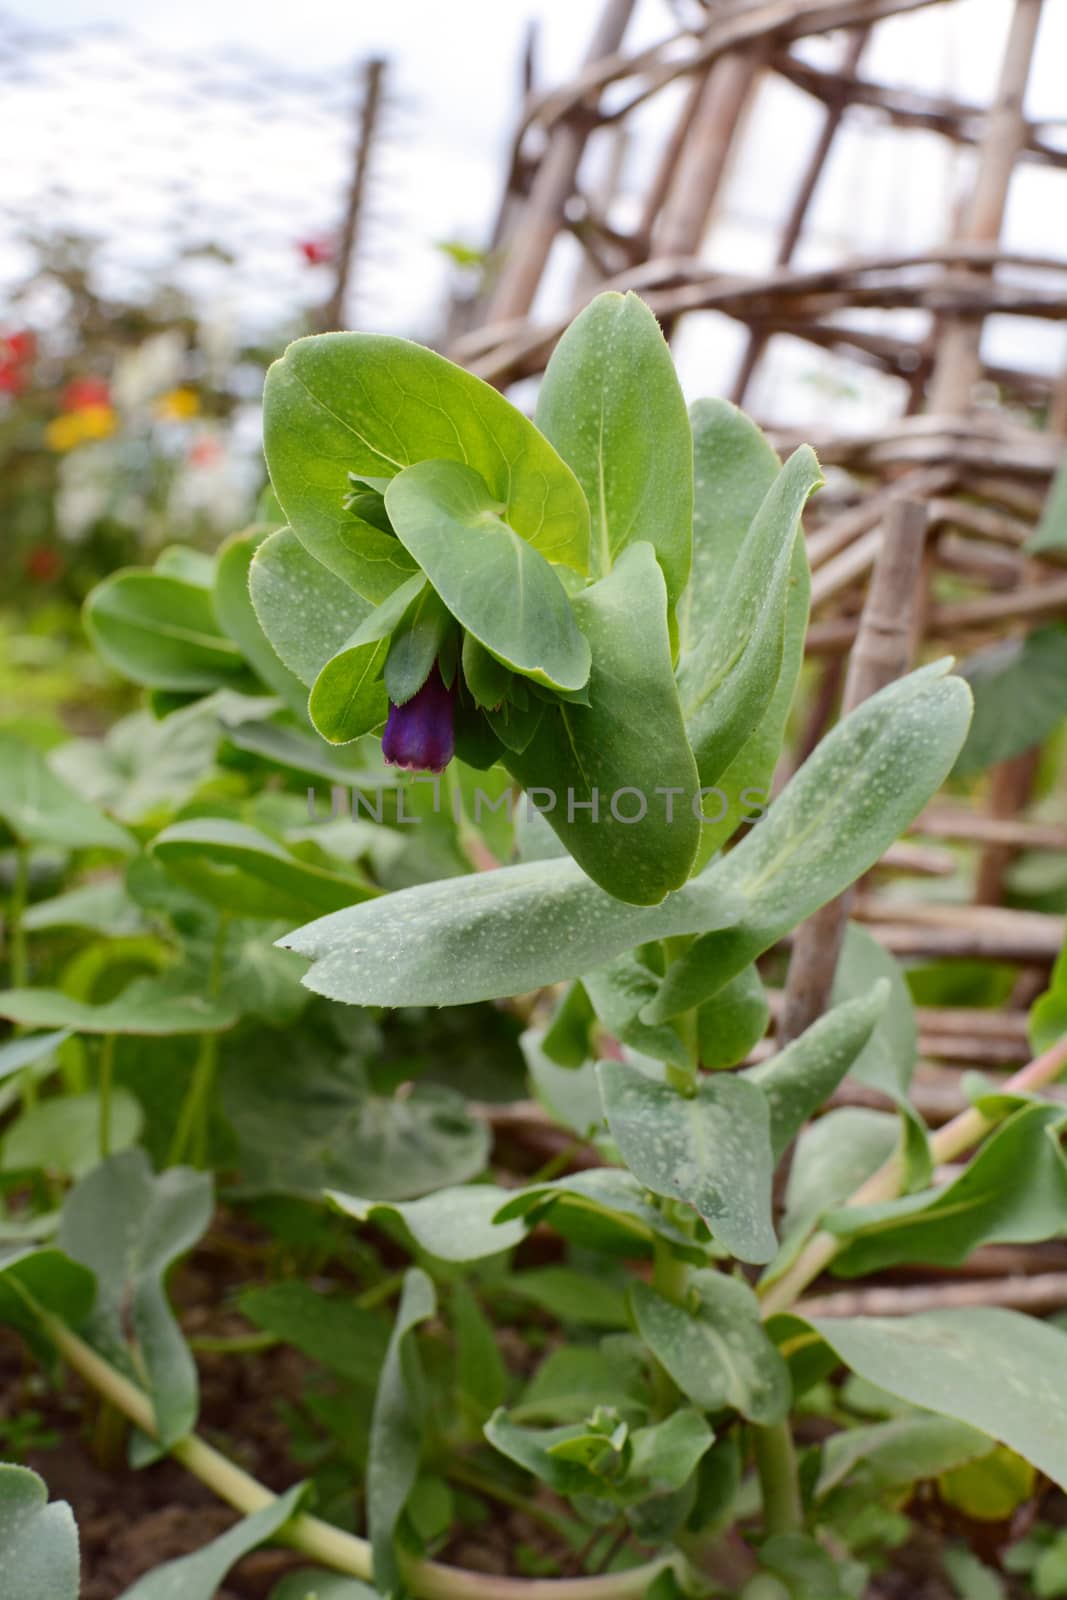 Cerinthe or honeywort, starting to bloom  by sarahdoow